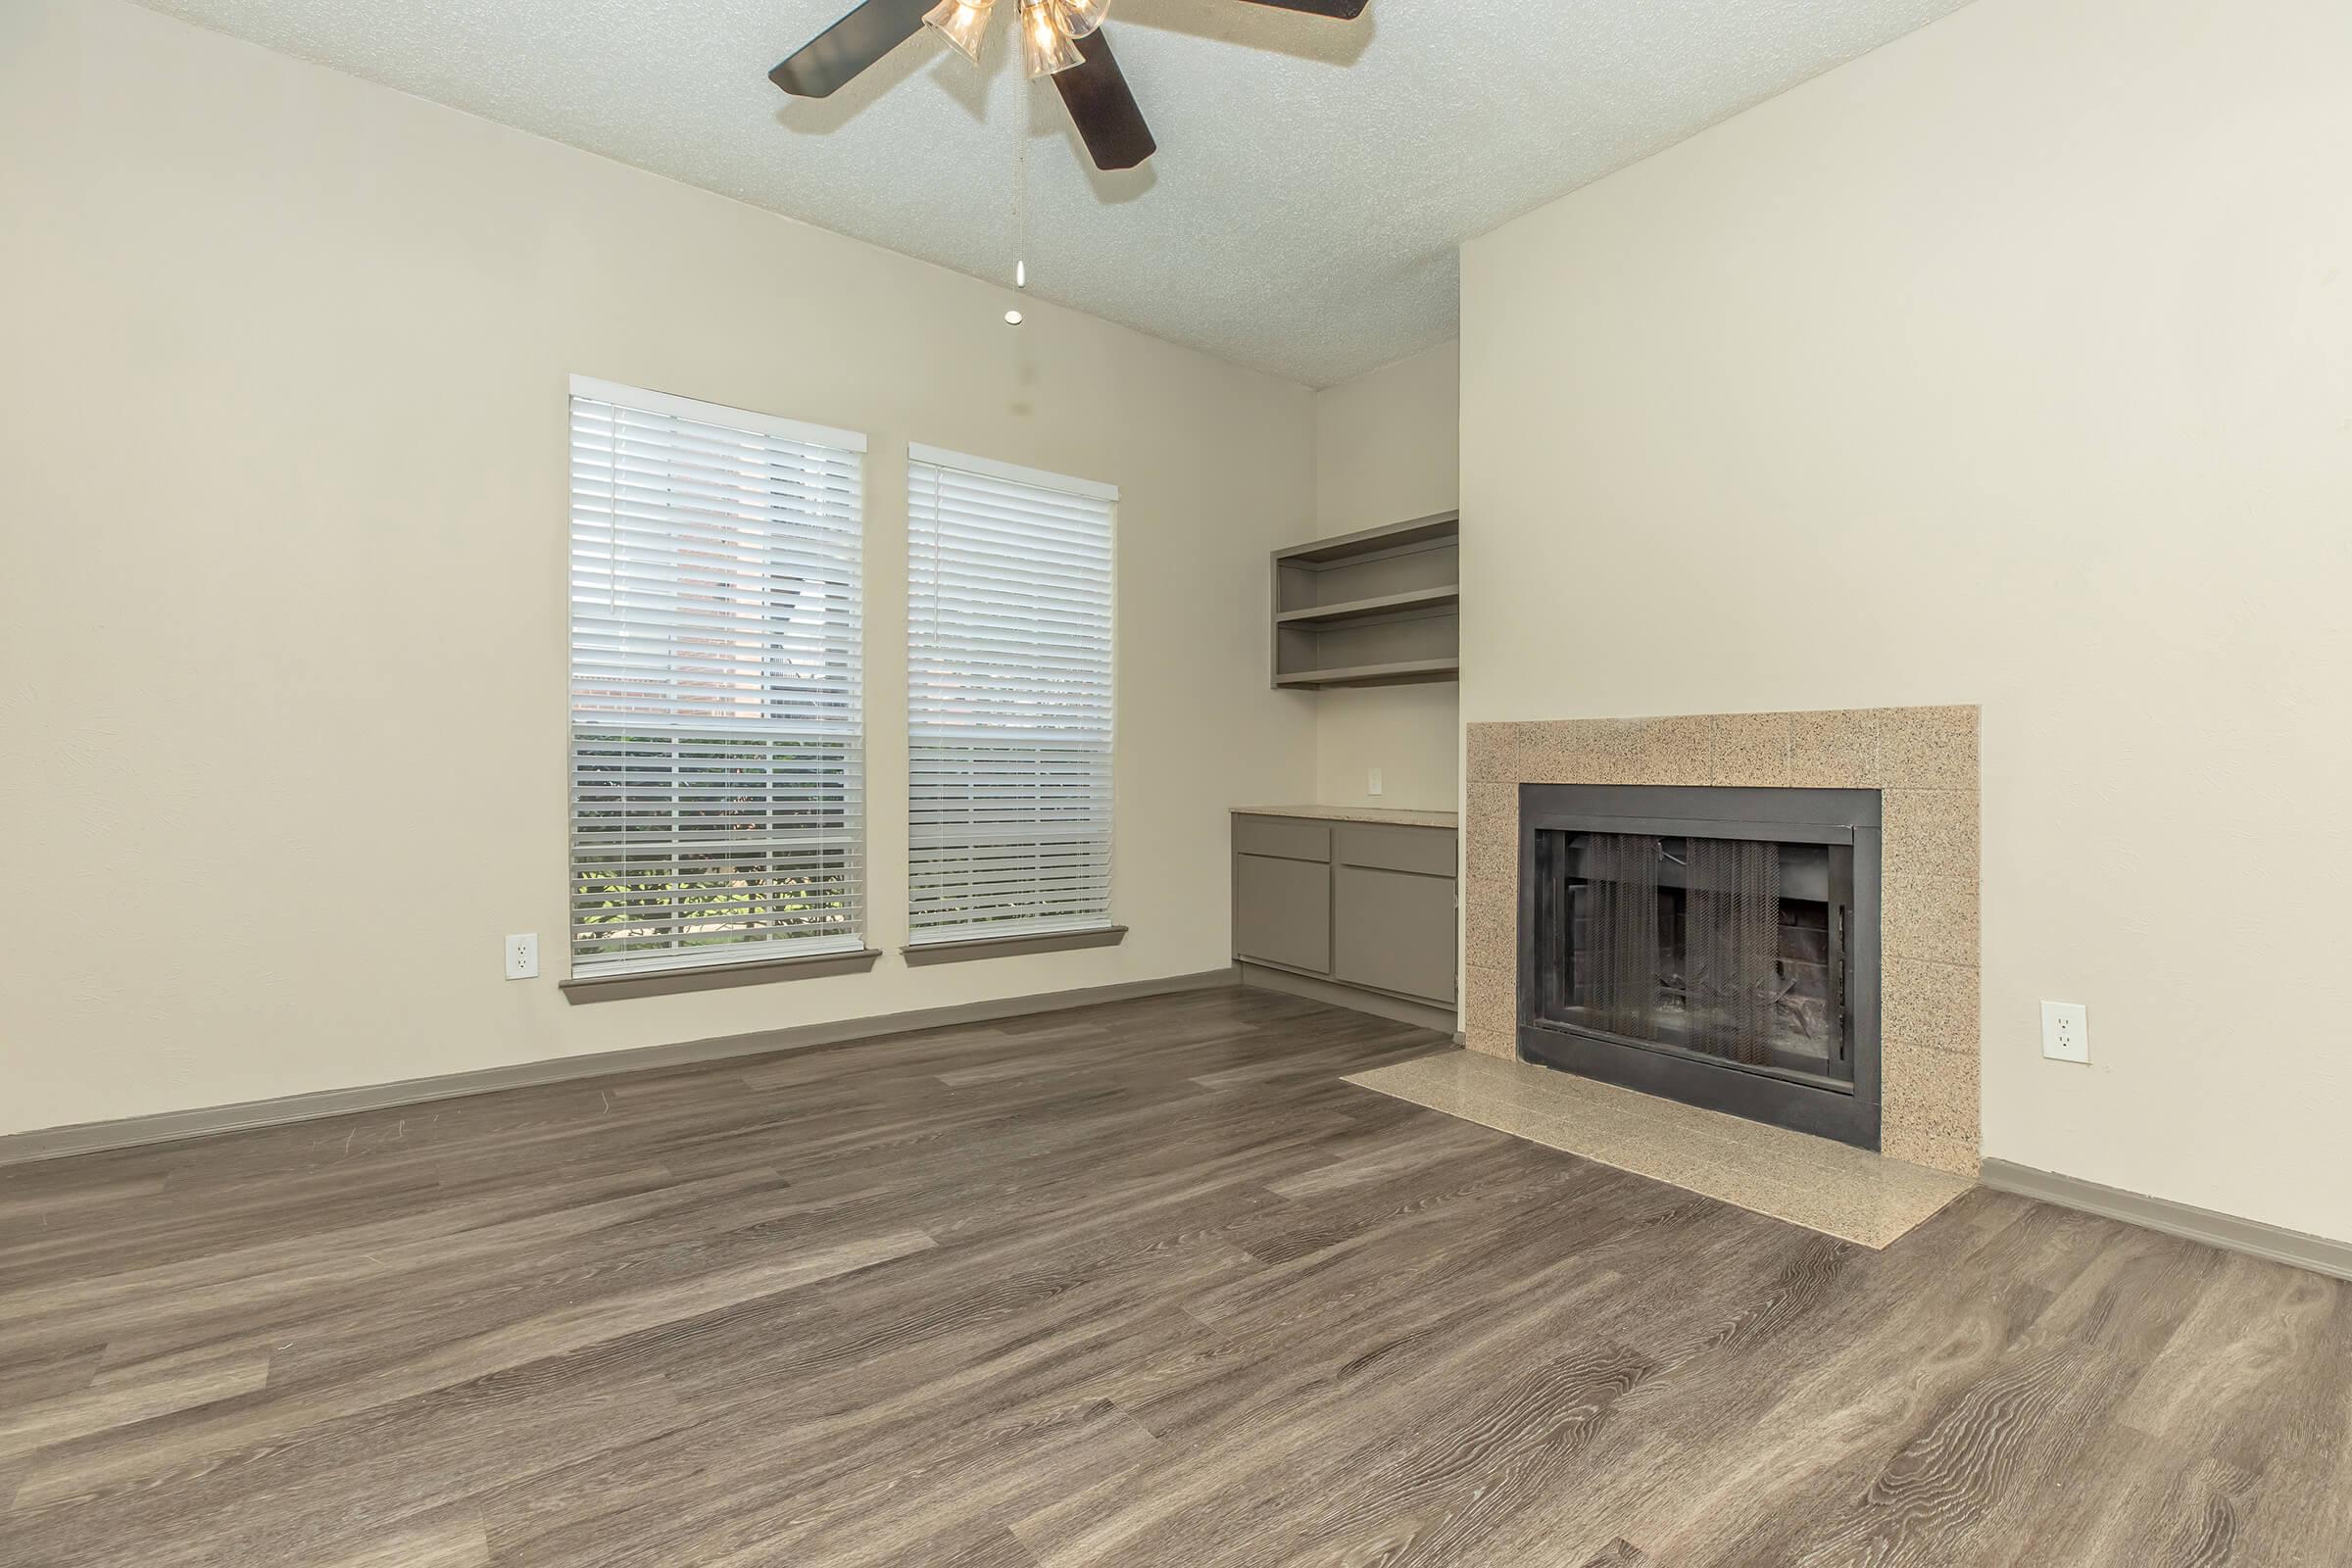 SPACIOUS FLOOR PLANS AT THE VERIDIAN PLACE APARTMENTS